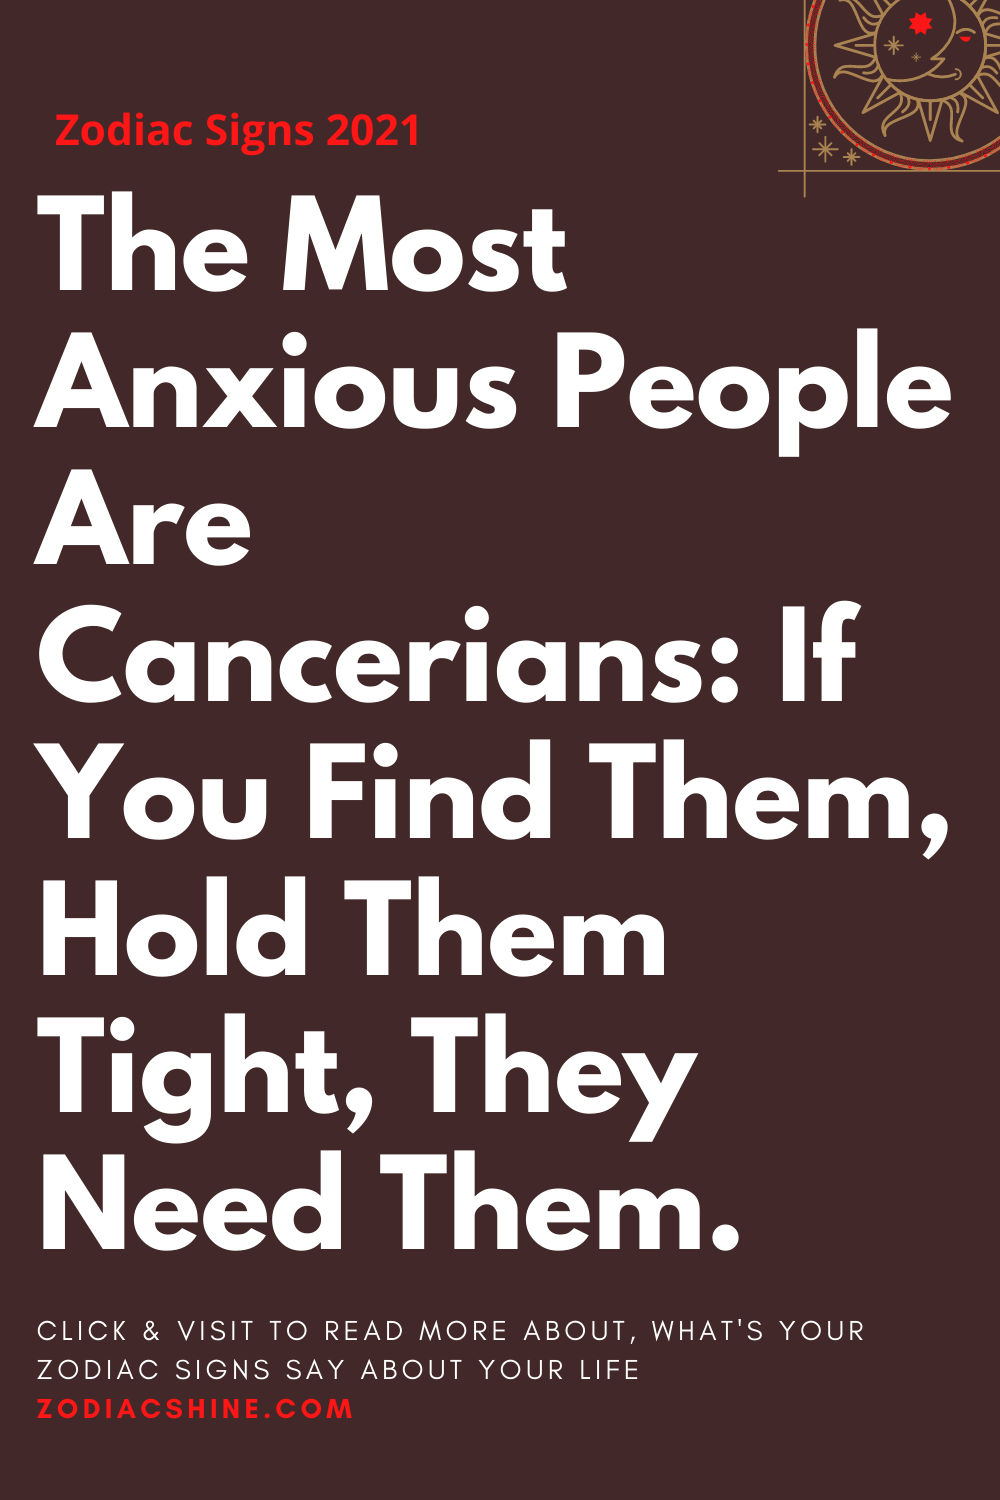 The Most Anxious People Are Cancerians: If You Find Them Hold Them Tight They Need Them.